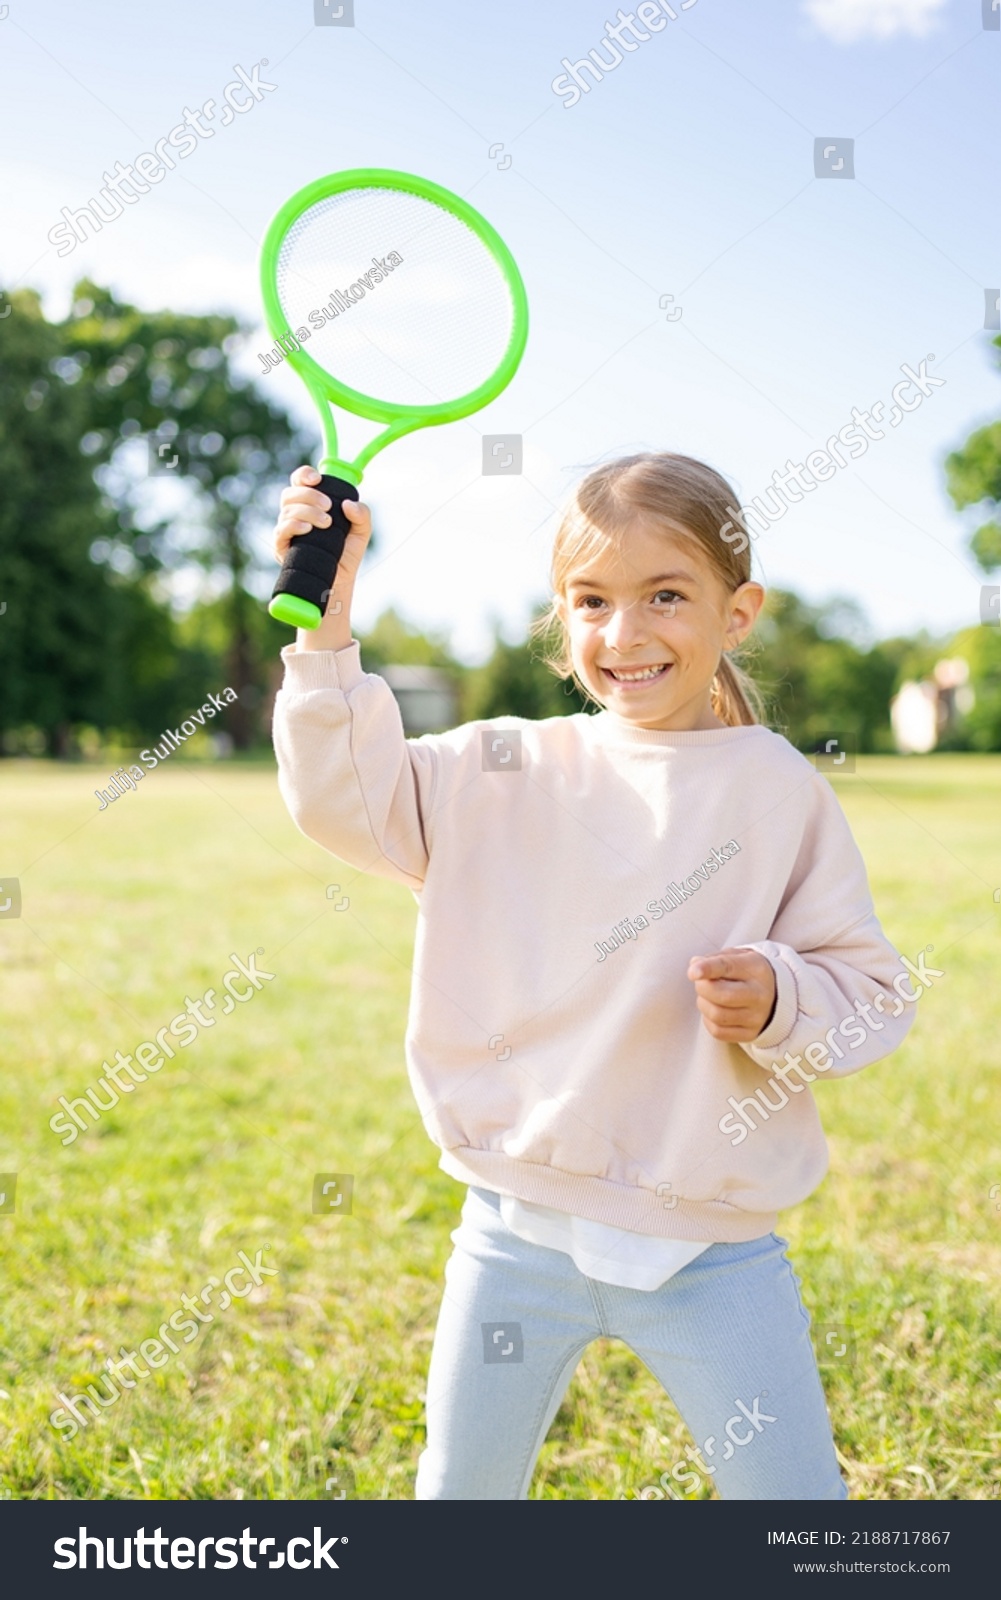 child holding badminton racket in the park, vacation, sport concept. #2188717867